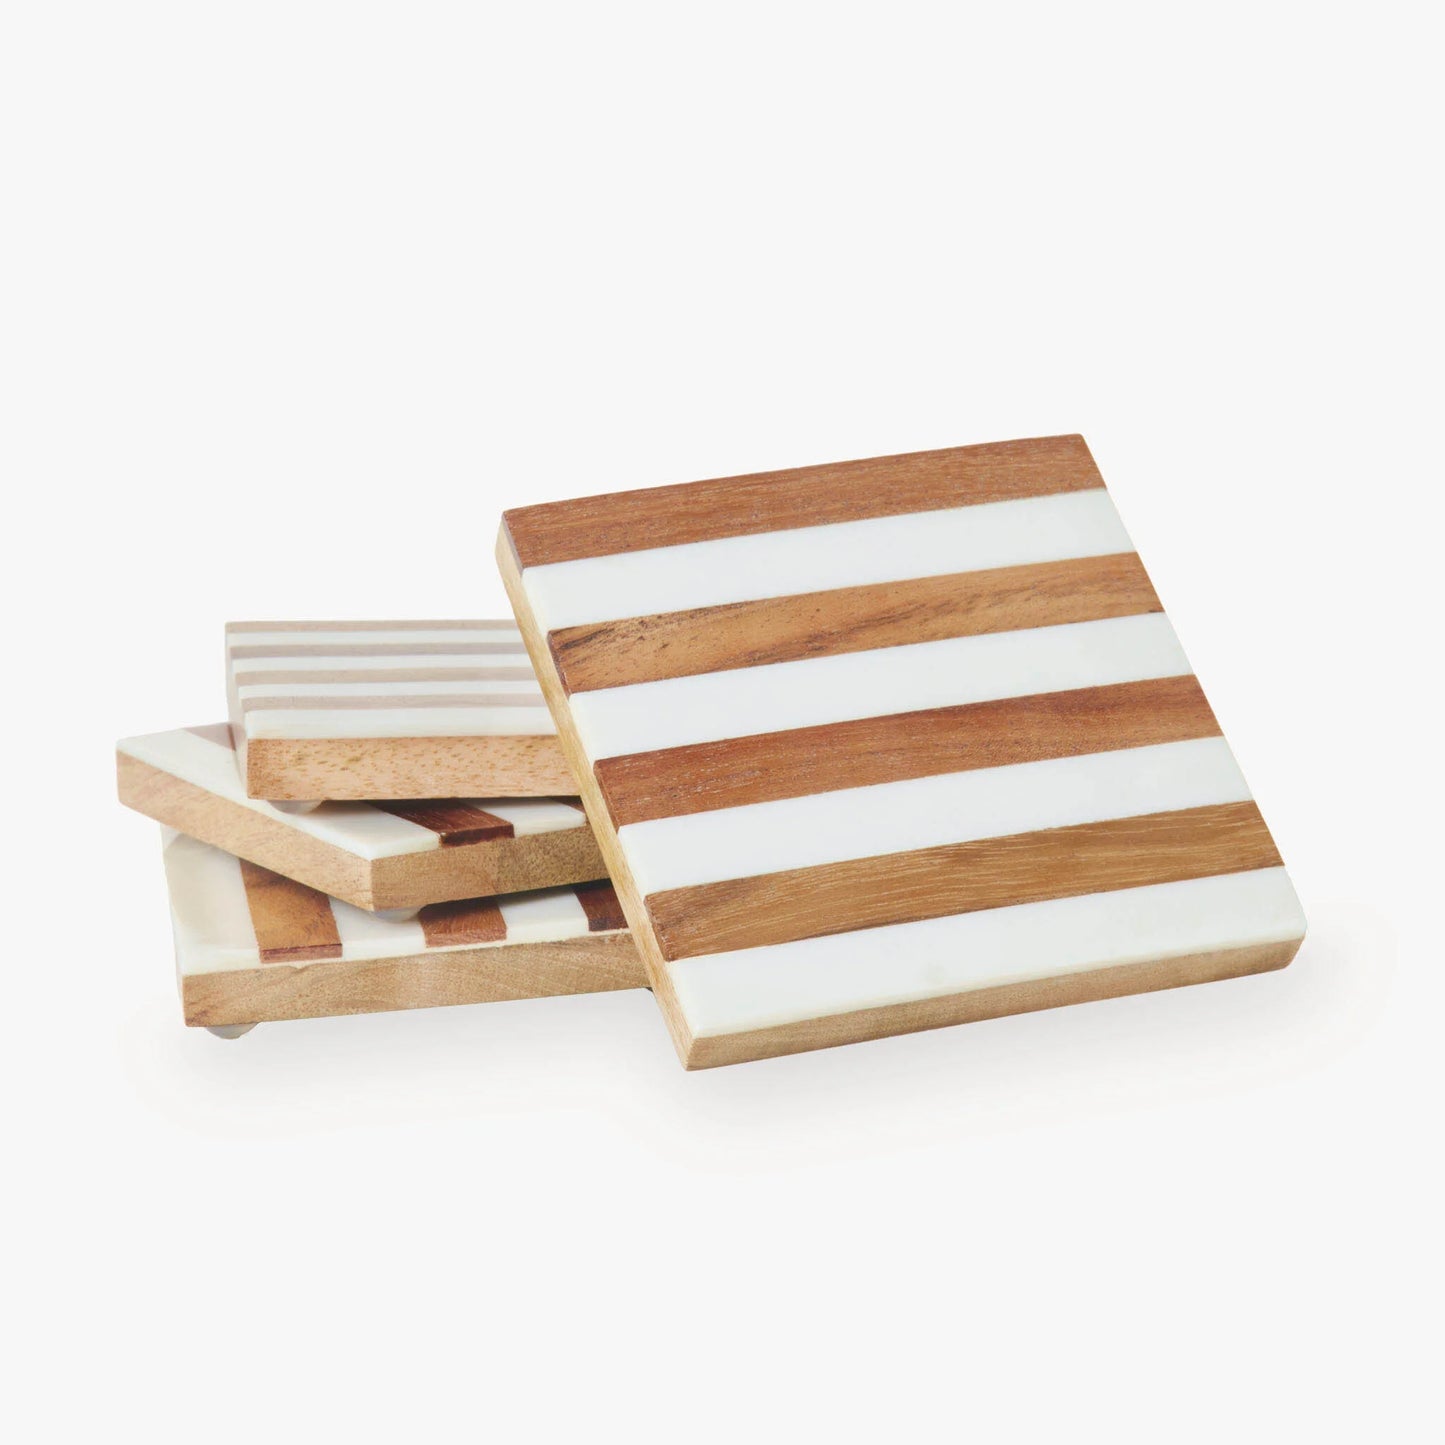 Wooden Coaster with Resin Finish - Set of 4 - Stripes